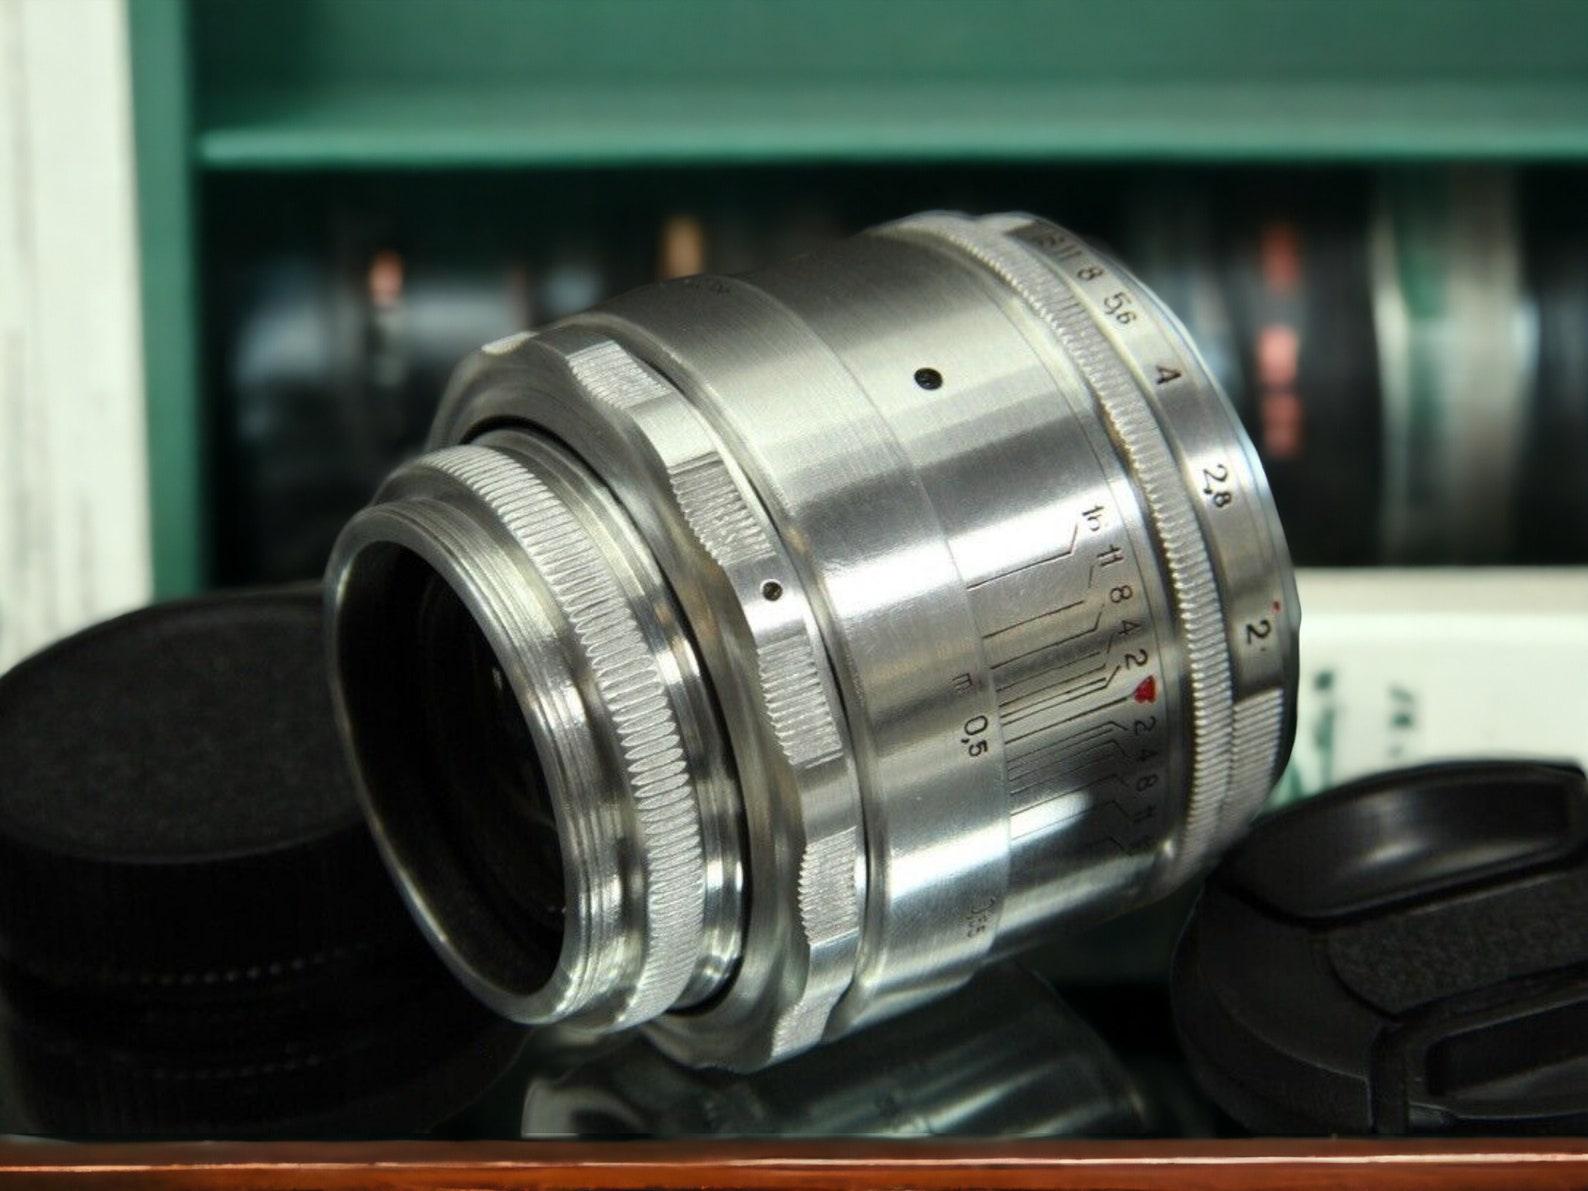 Anamorphic Lens Helios 44-2 58mm Wine Mod Silver with any adaptor on your choice.